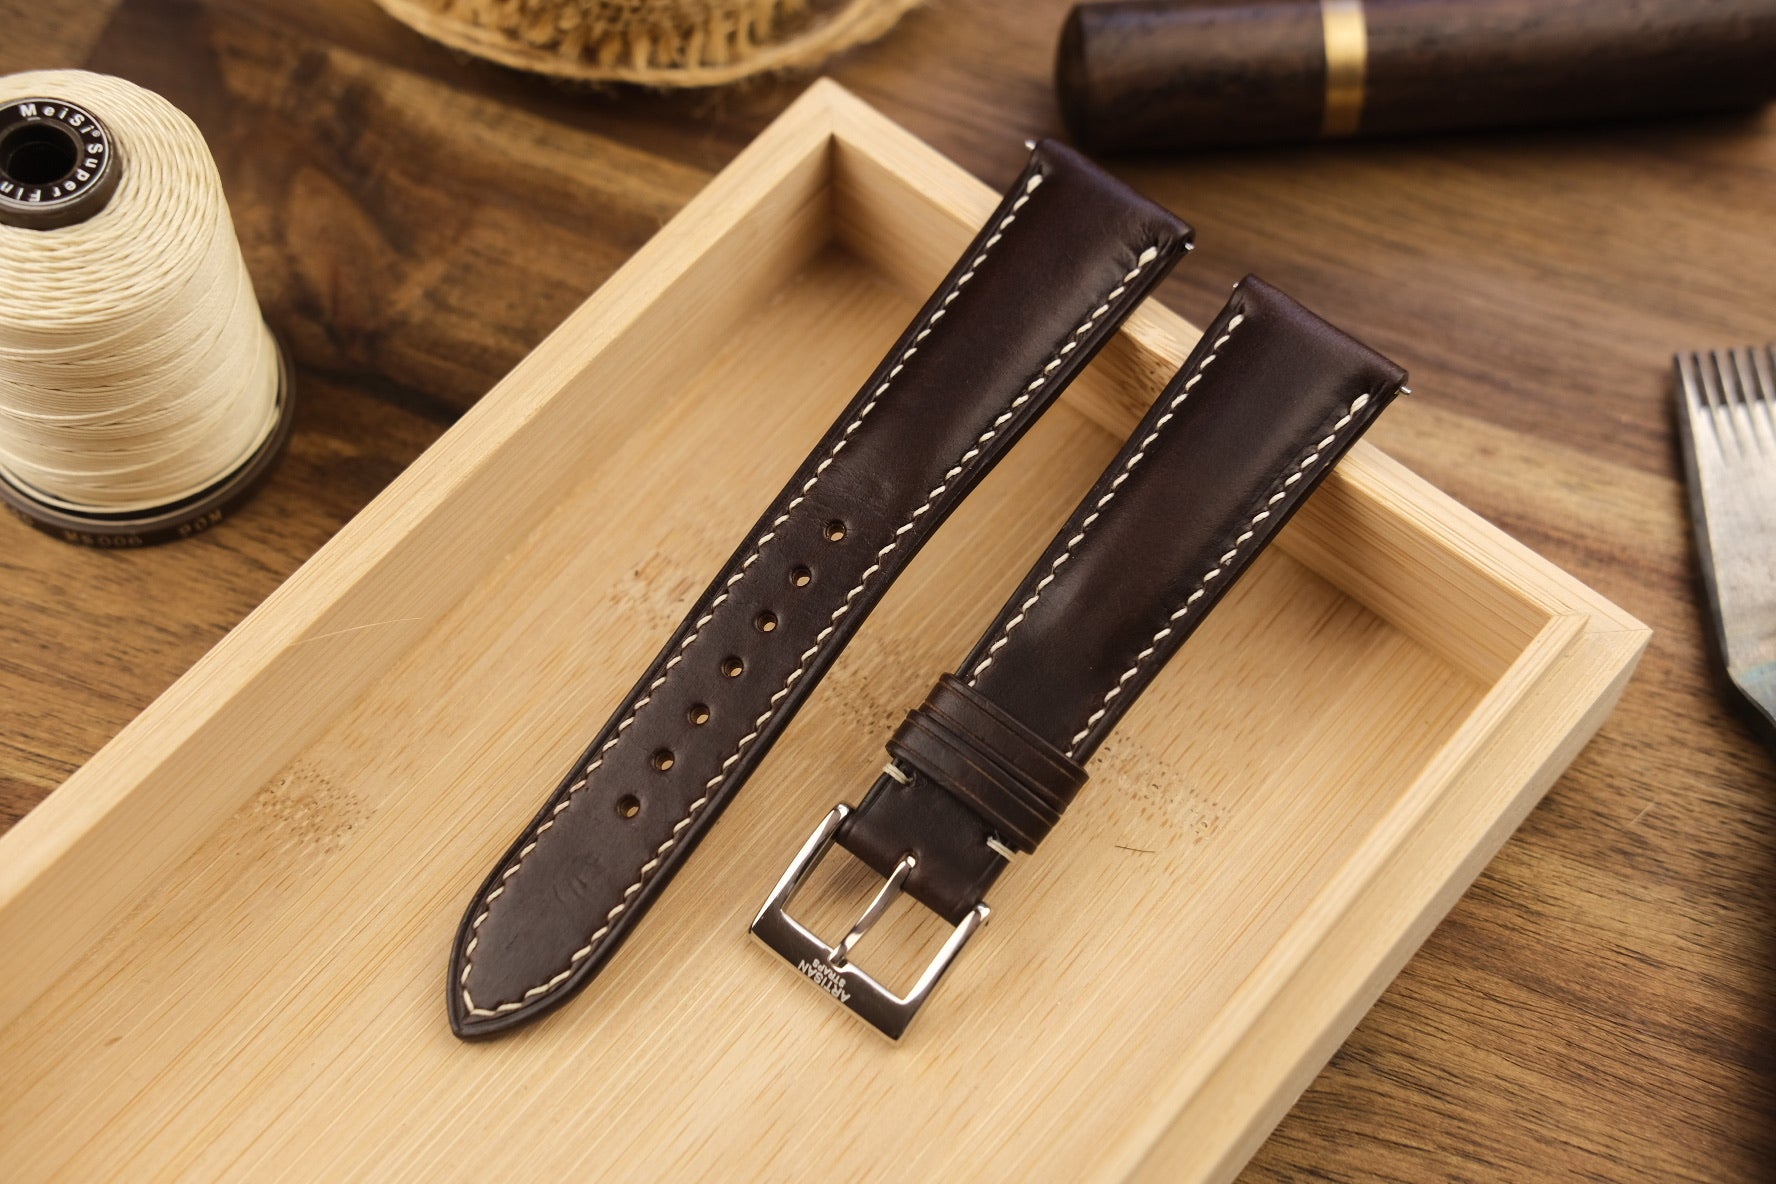 Horween Chromexcel Padded Leather Strap in Dark Brown (Ready-to-Wear) - Artisan Straps